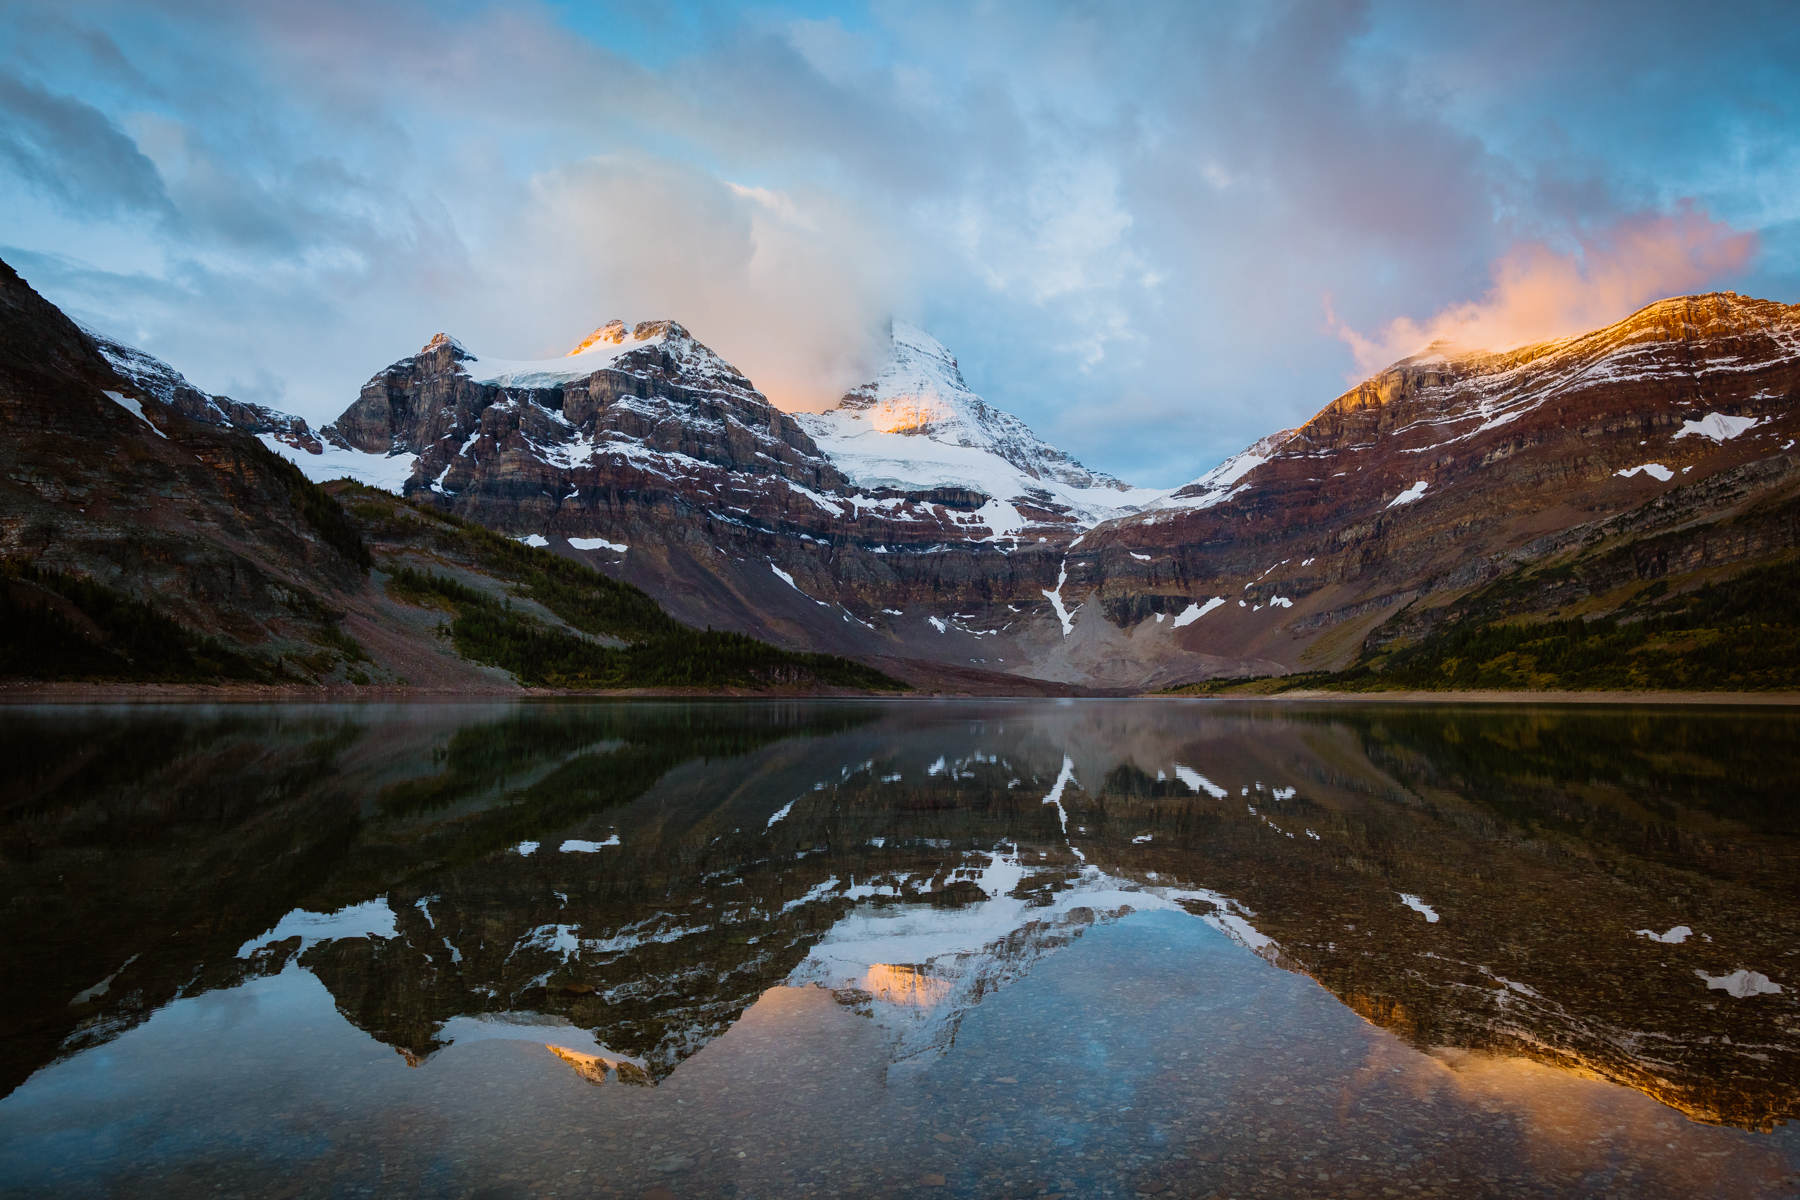 Mount Assiniboine Elopement Photographers at a Backcountry Lodge - Photo 46